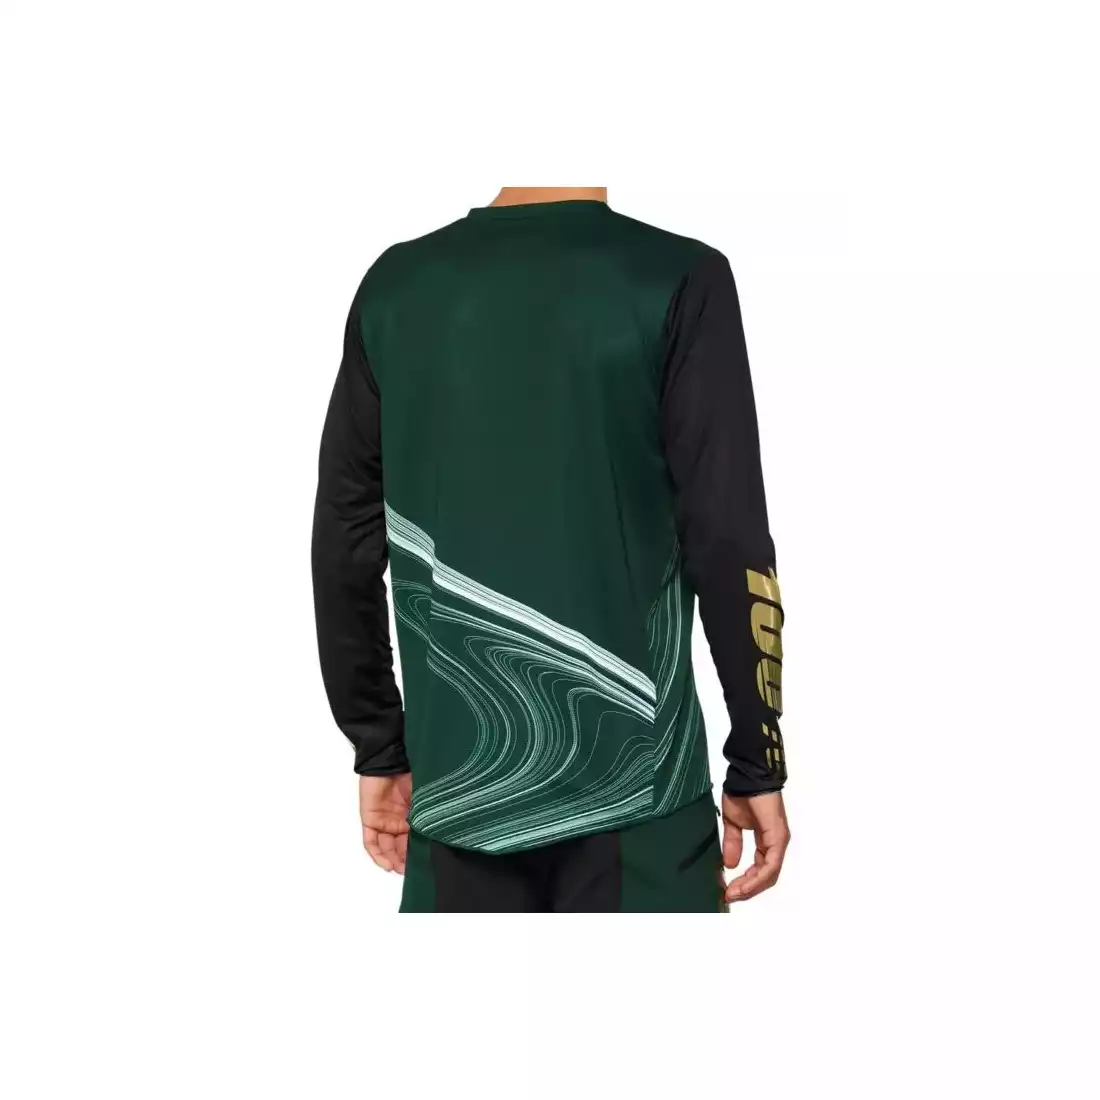 100% R-CORE X LE men's long sleeve cycling jersey, forest green